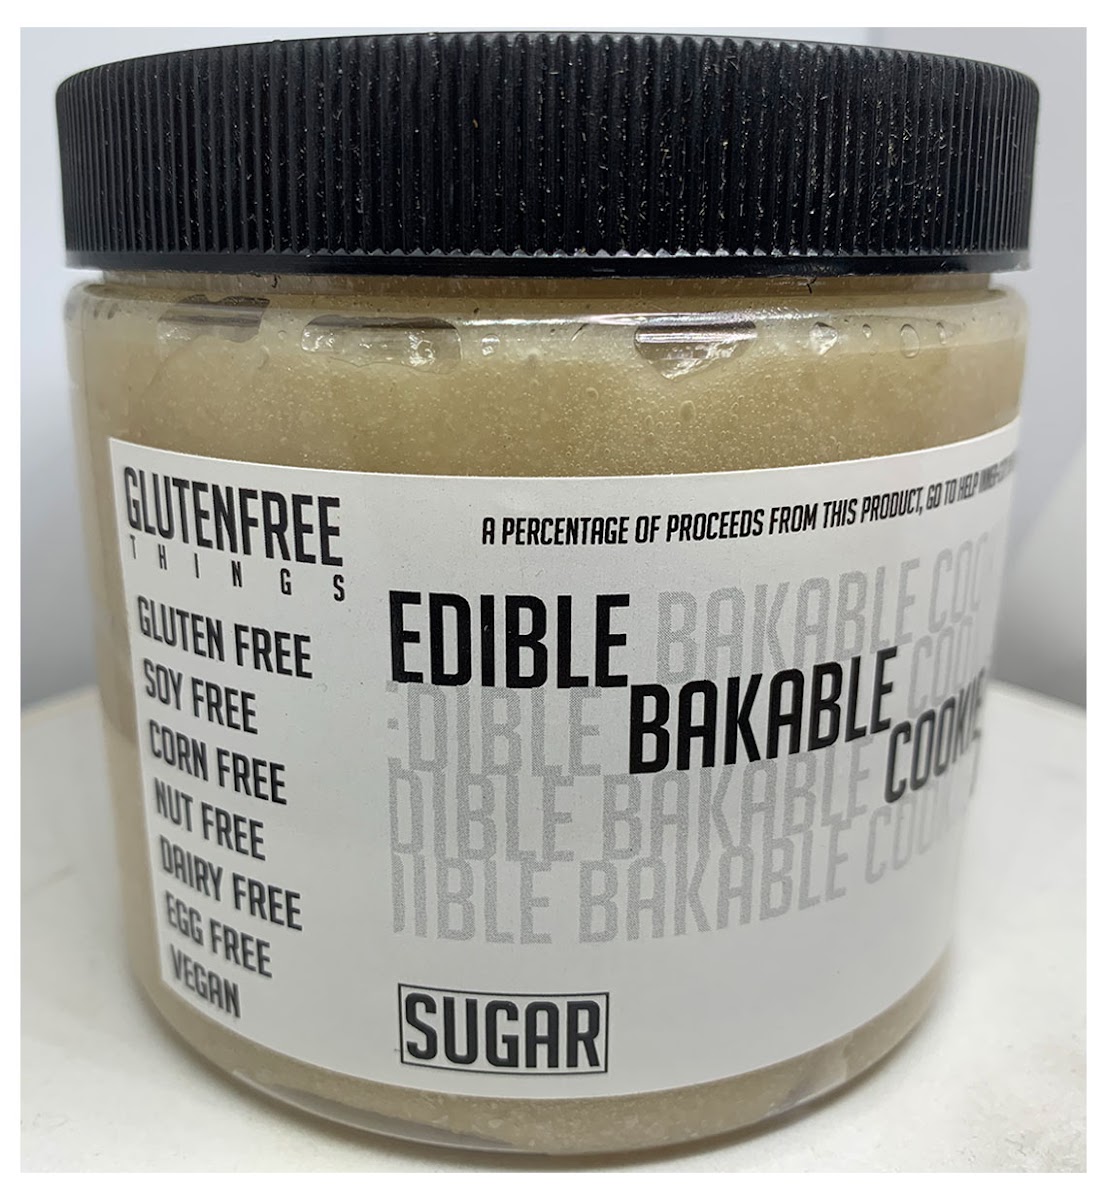 New easy scoop packaging for our incredible EDIBLE bakeable COOKIE DOUGH in SUGAR COOKIE flavor. Free from: gluten, dairy, eggs, soy, corn and nuts.